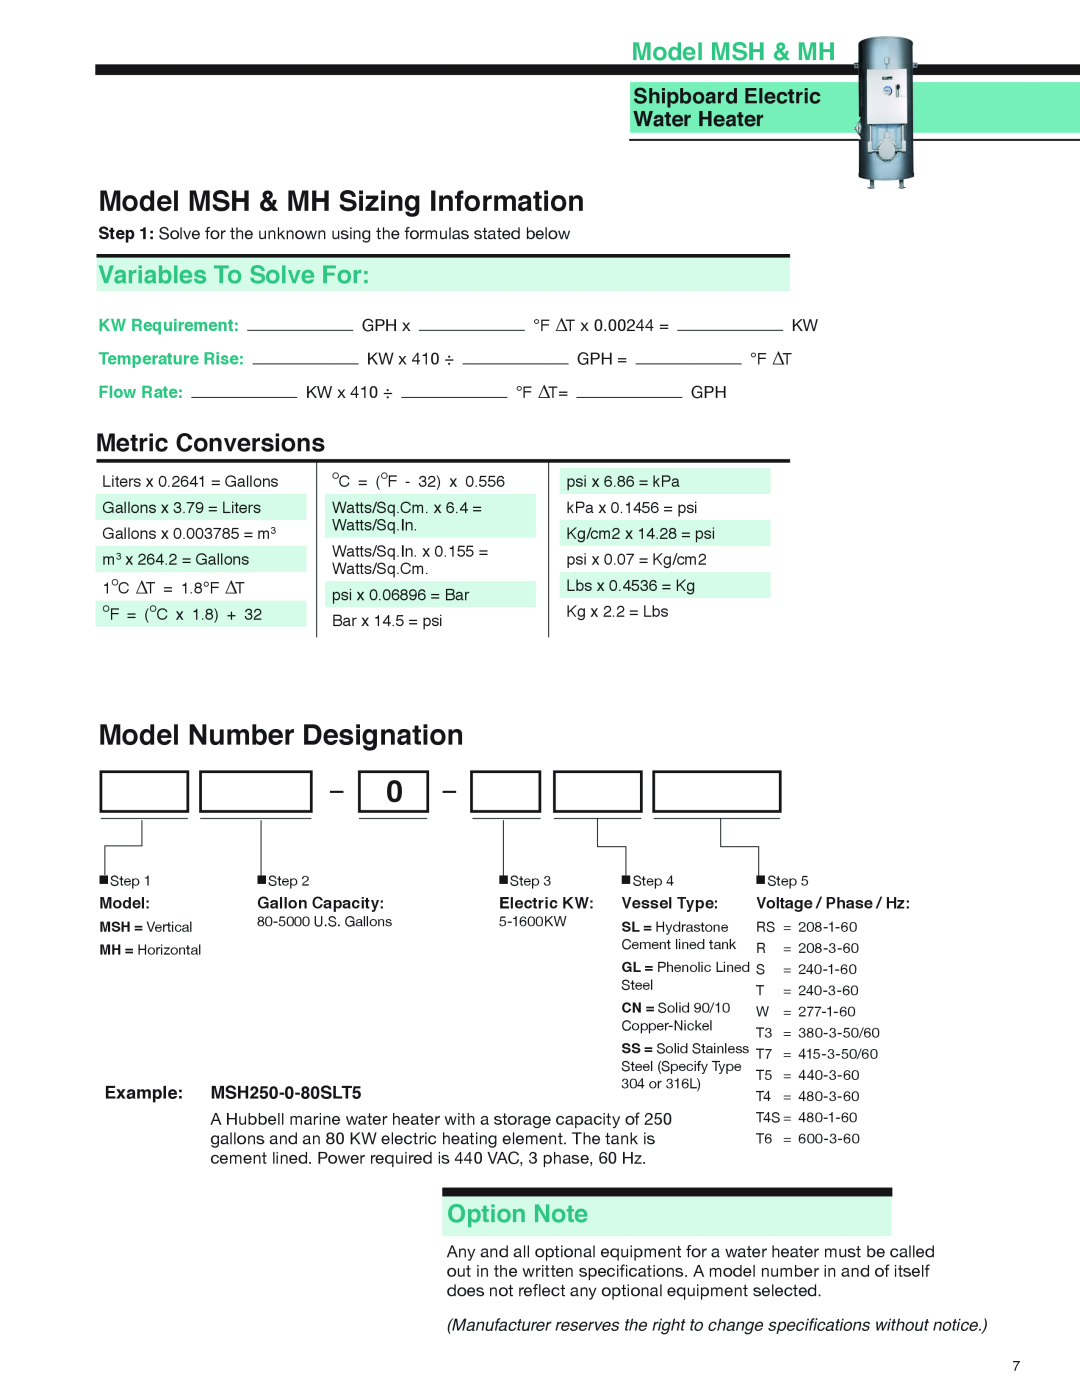 Hubbell manual Model MSH & MH Sizing Information, Model Number Designation, Variables To Solve For, Metric Conversions 